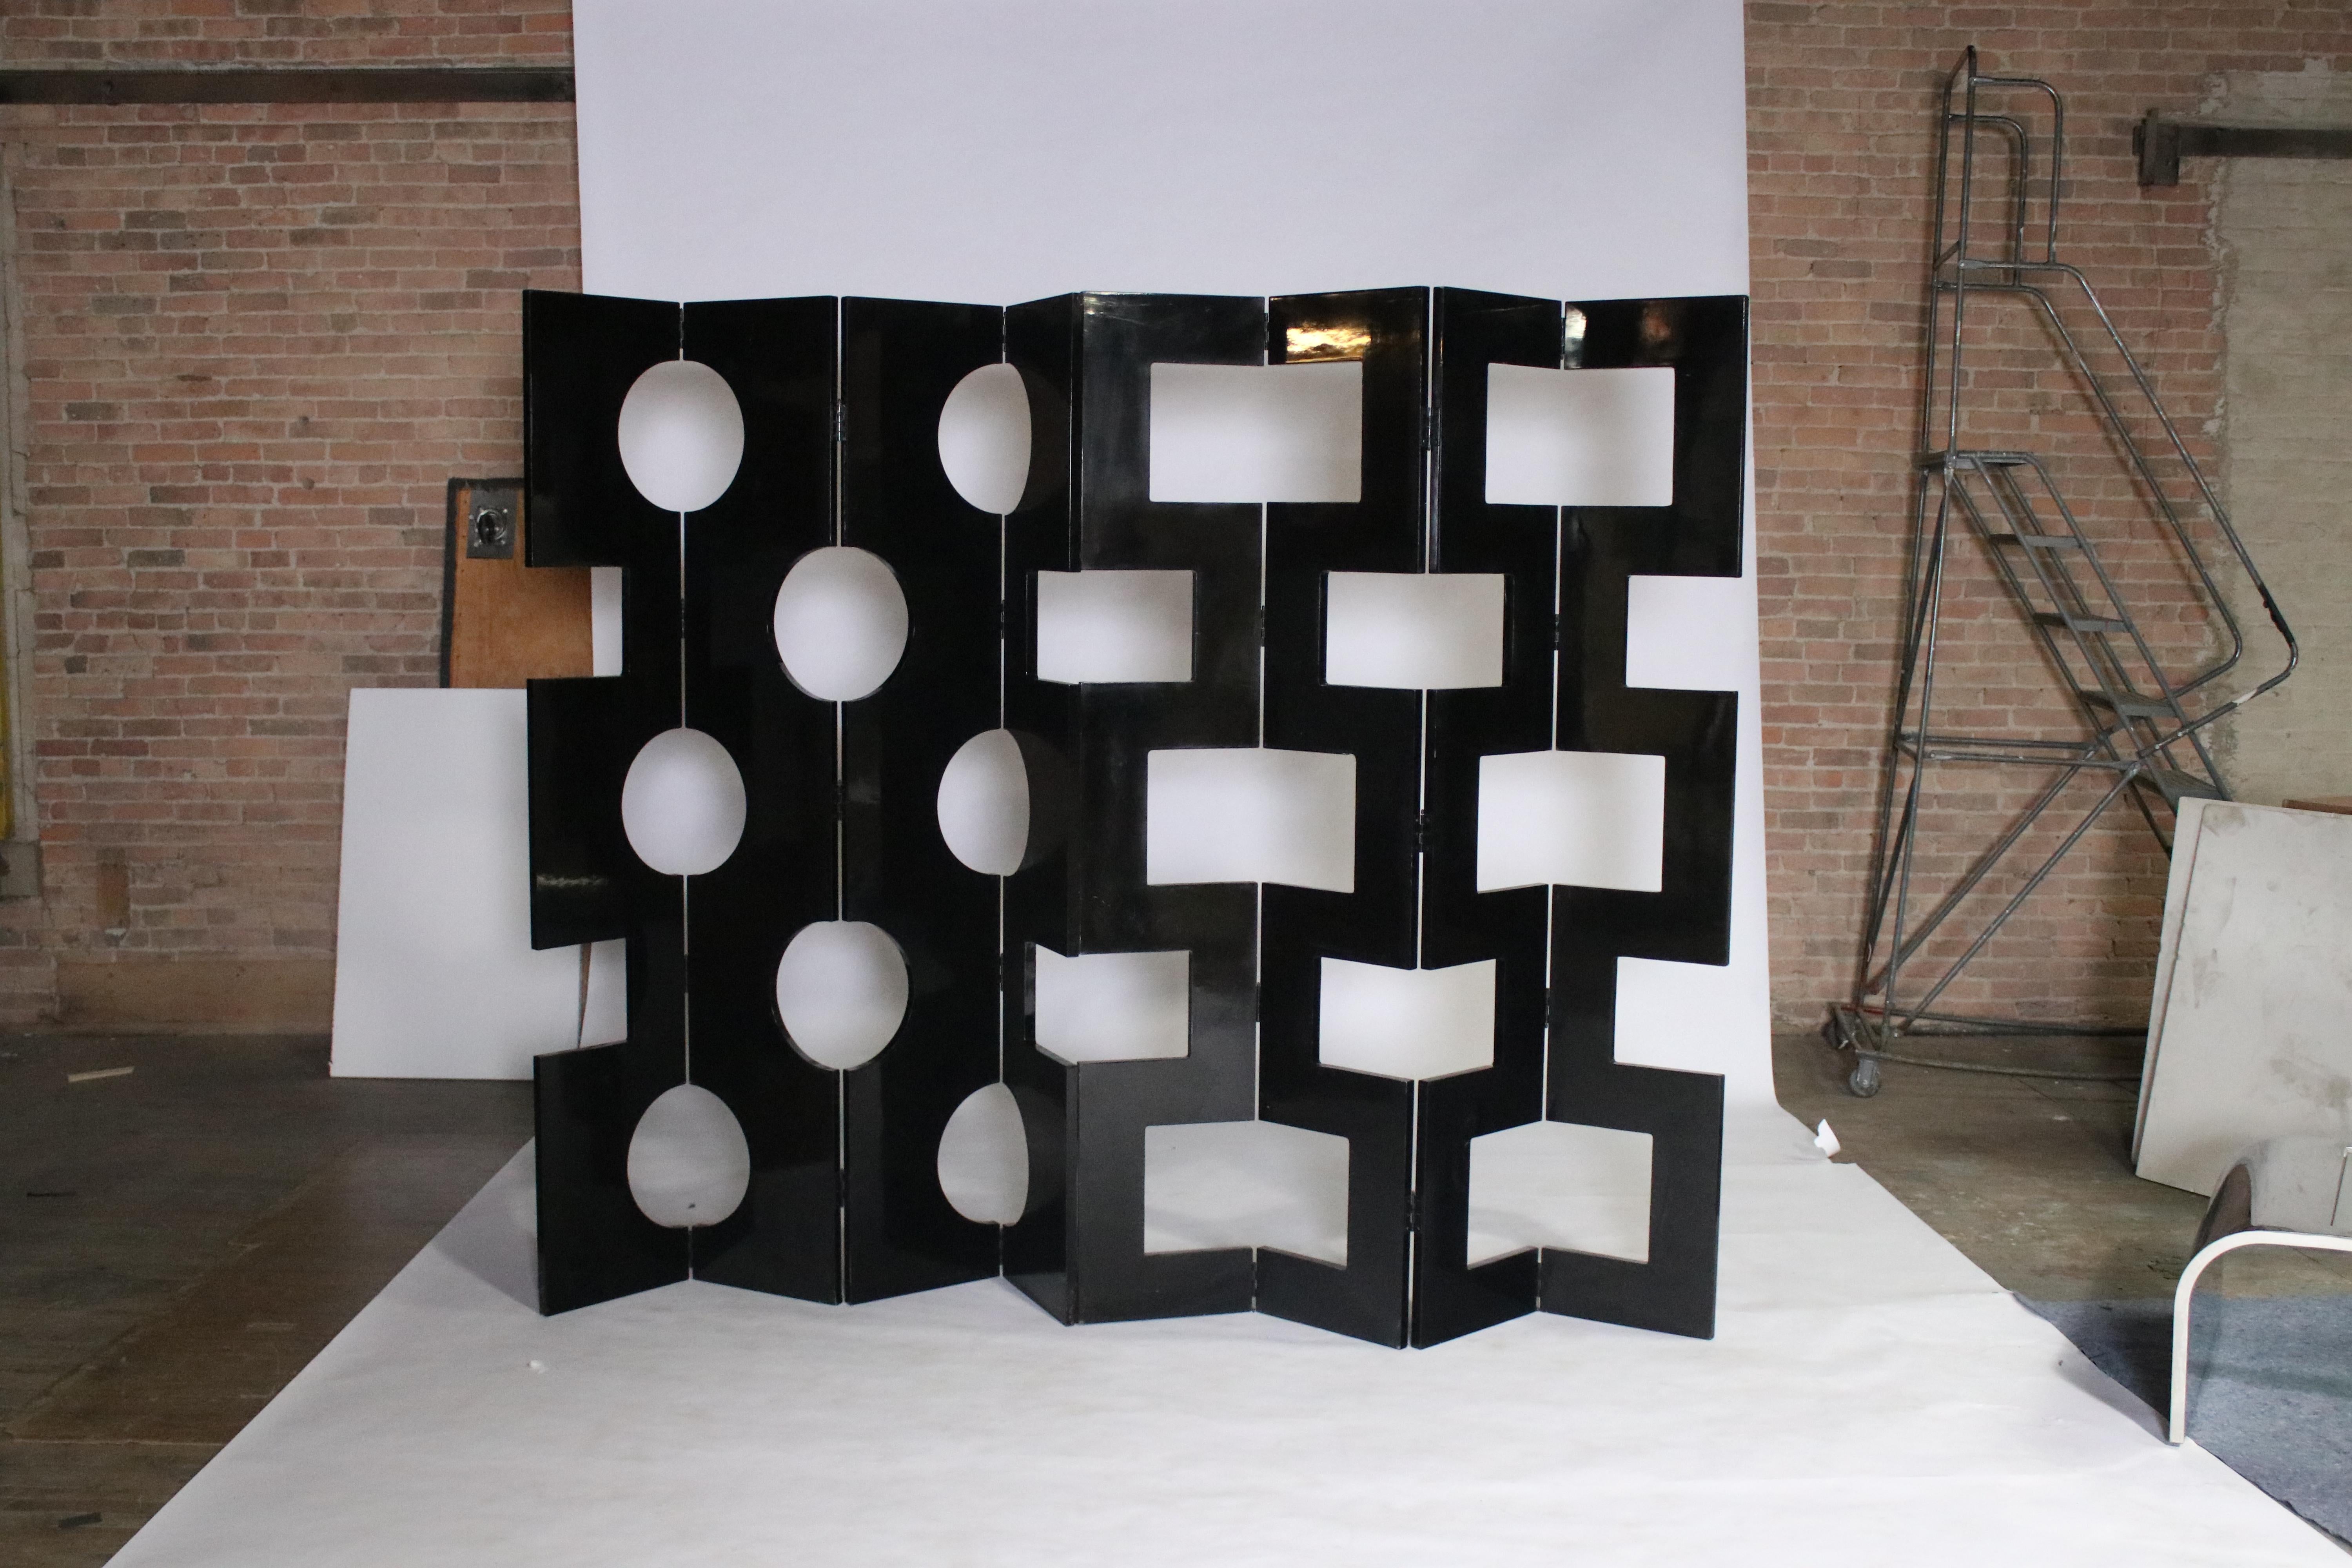 2 Four-panel modernist black lacquered room dividers sourced from vintage Saks 5th Avenue prop displays. Each panel is lacquered on both sides one with round circle holes and the other with square holes. They can be displayed together by hinges or